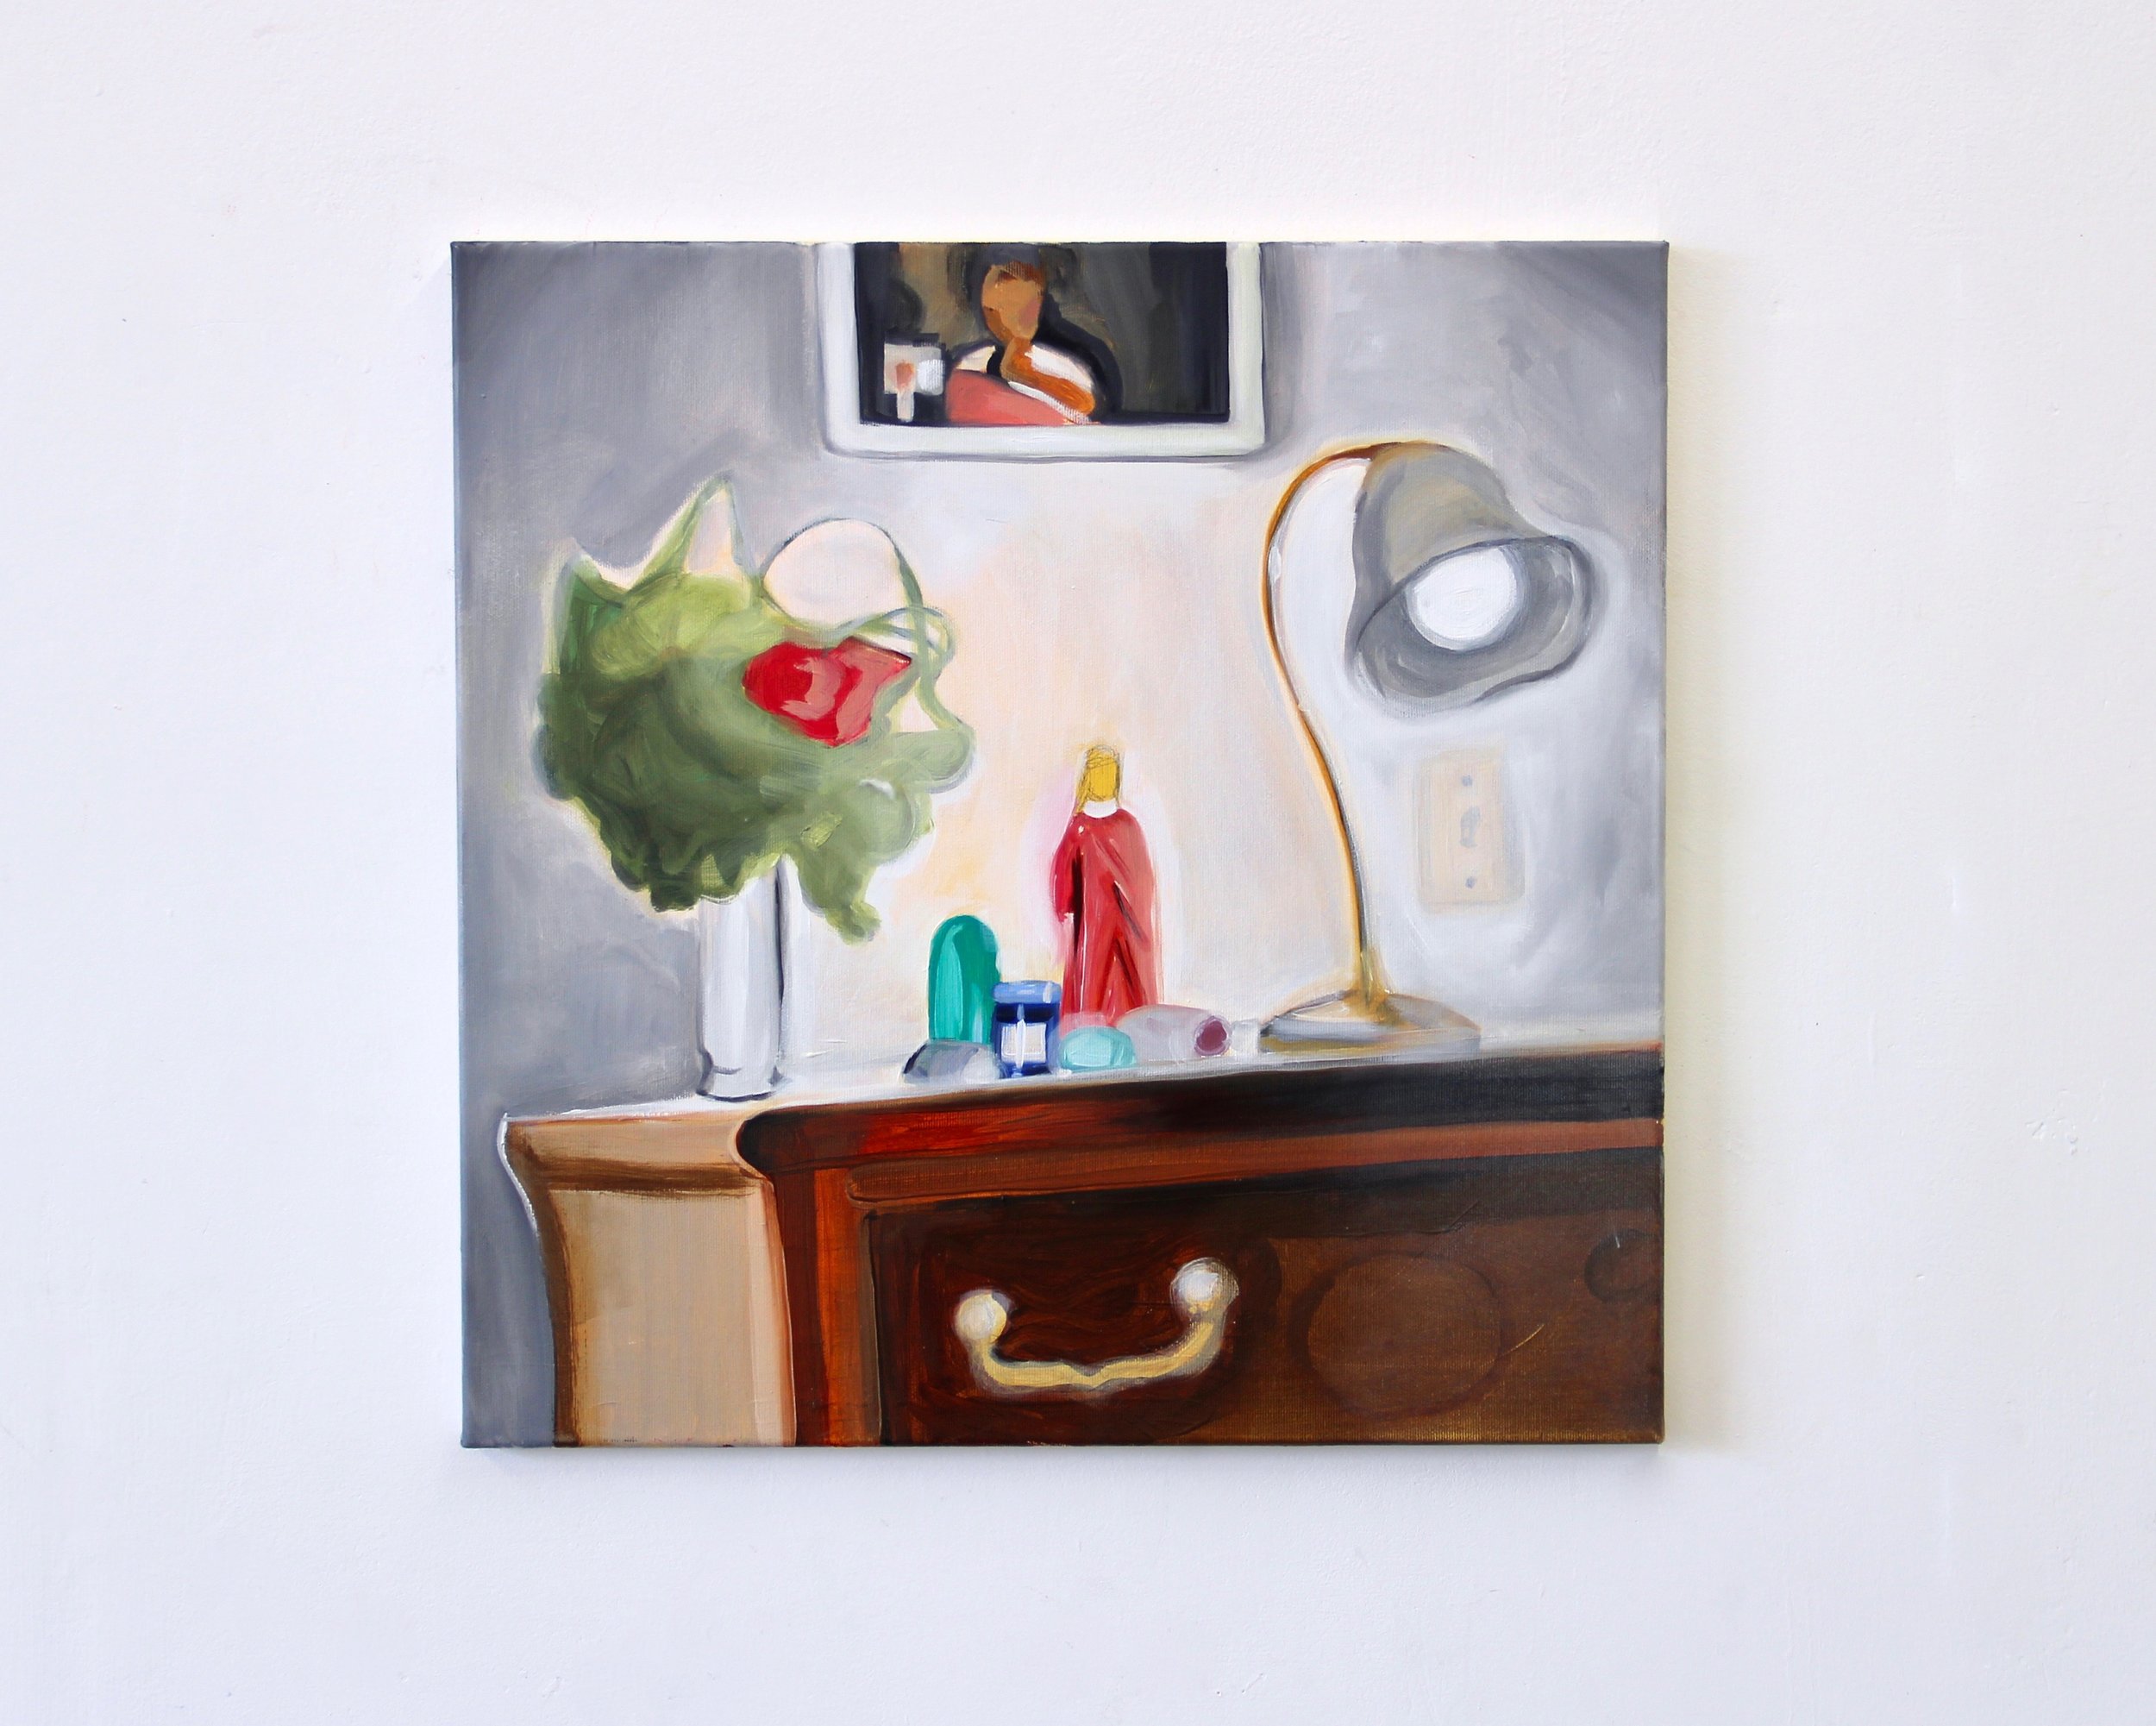   Meridian Still Life 2 , 2018 Oil on canvas 20 x 20 inches 